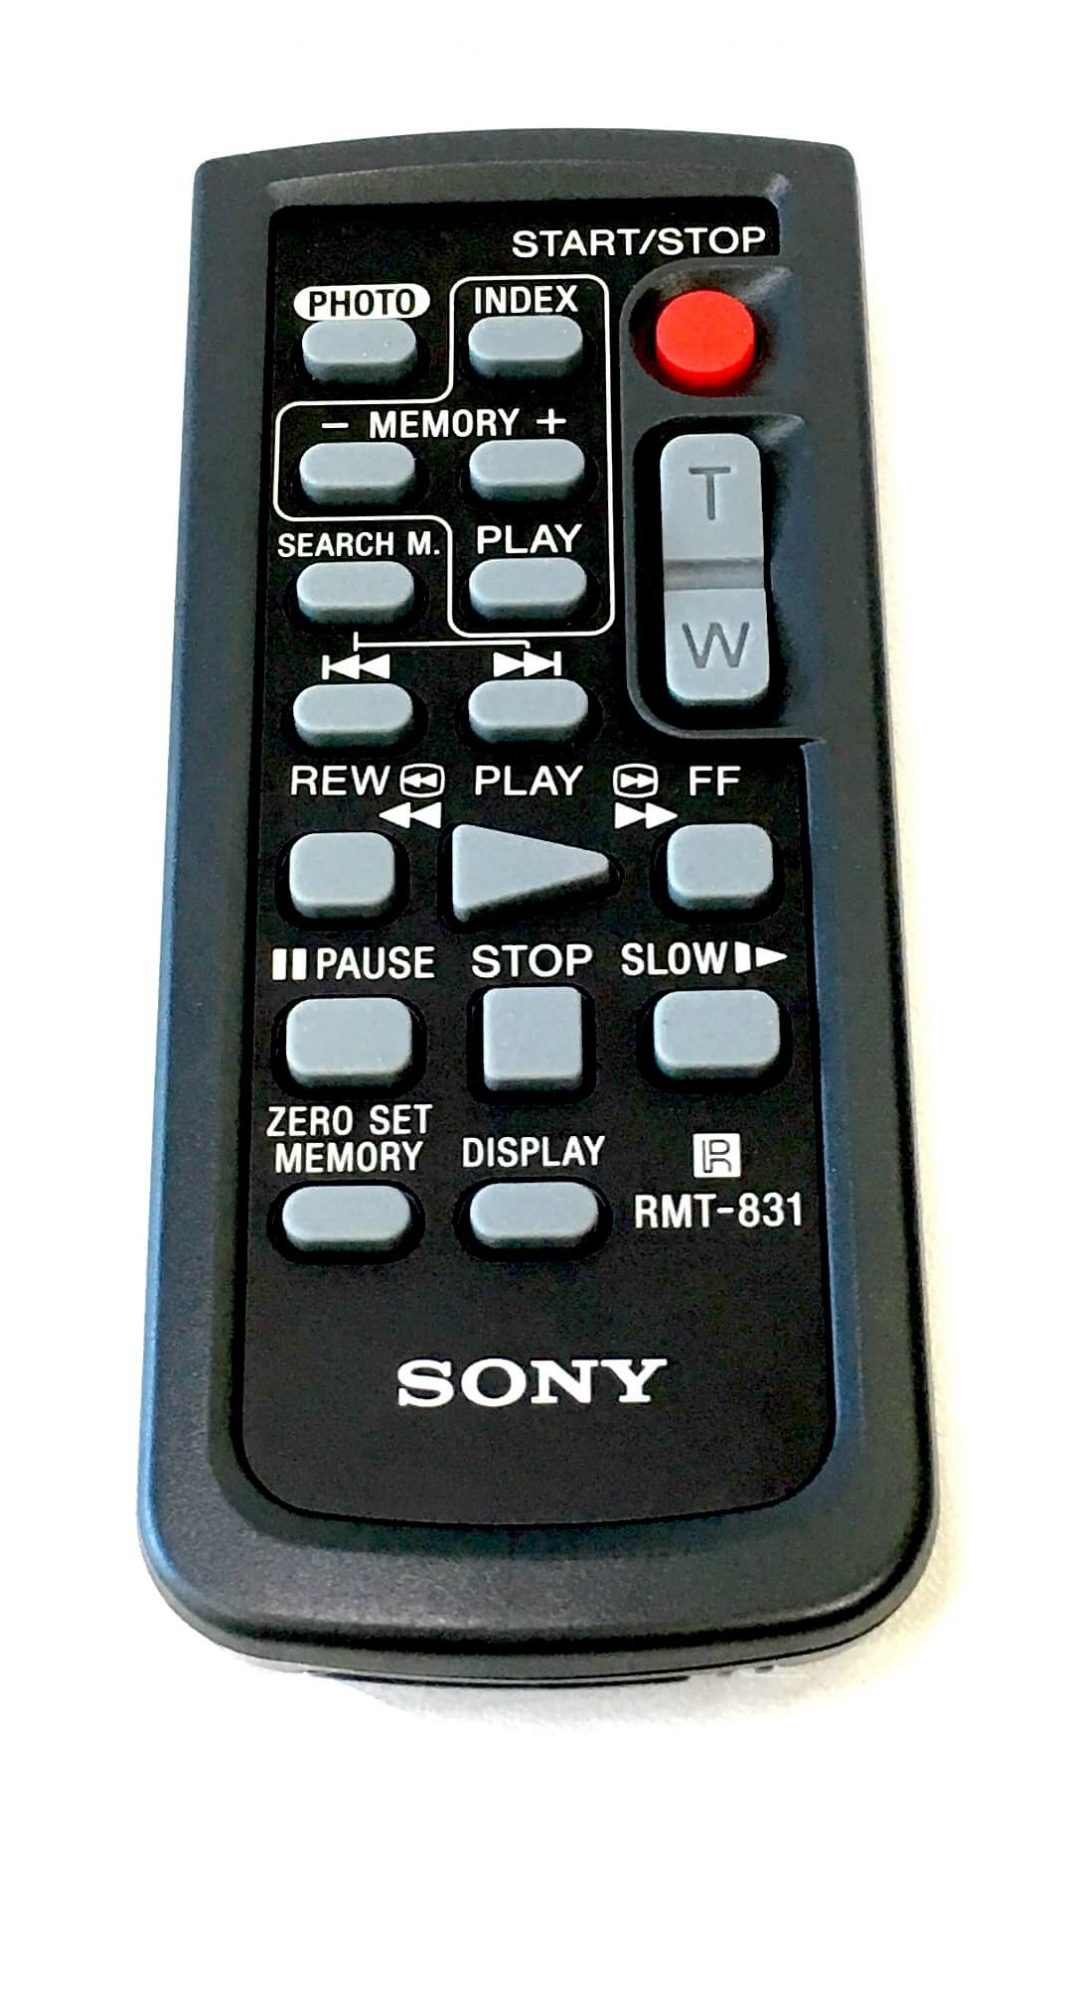 Original wireless remote control that came with the Sony HVR-Z5U camcorder. It is a genuine Sony part, sourced directly from Sony USA. Brand new factory fresh. Free Shipping.